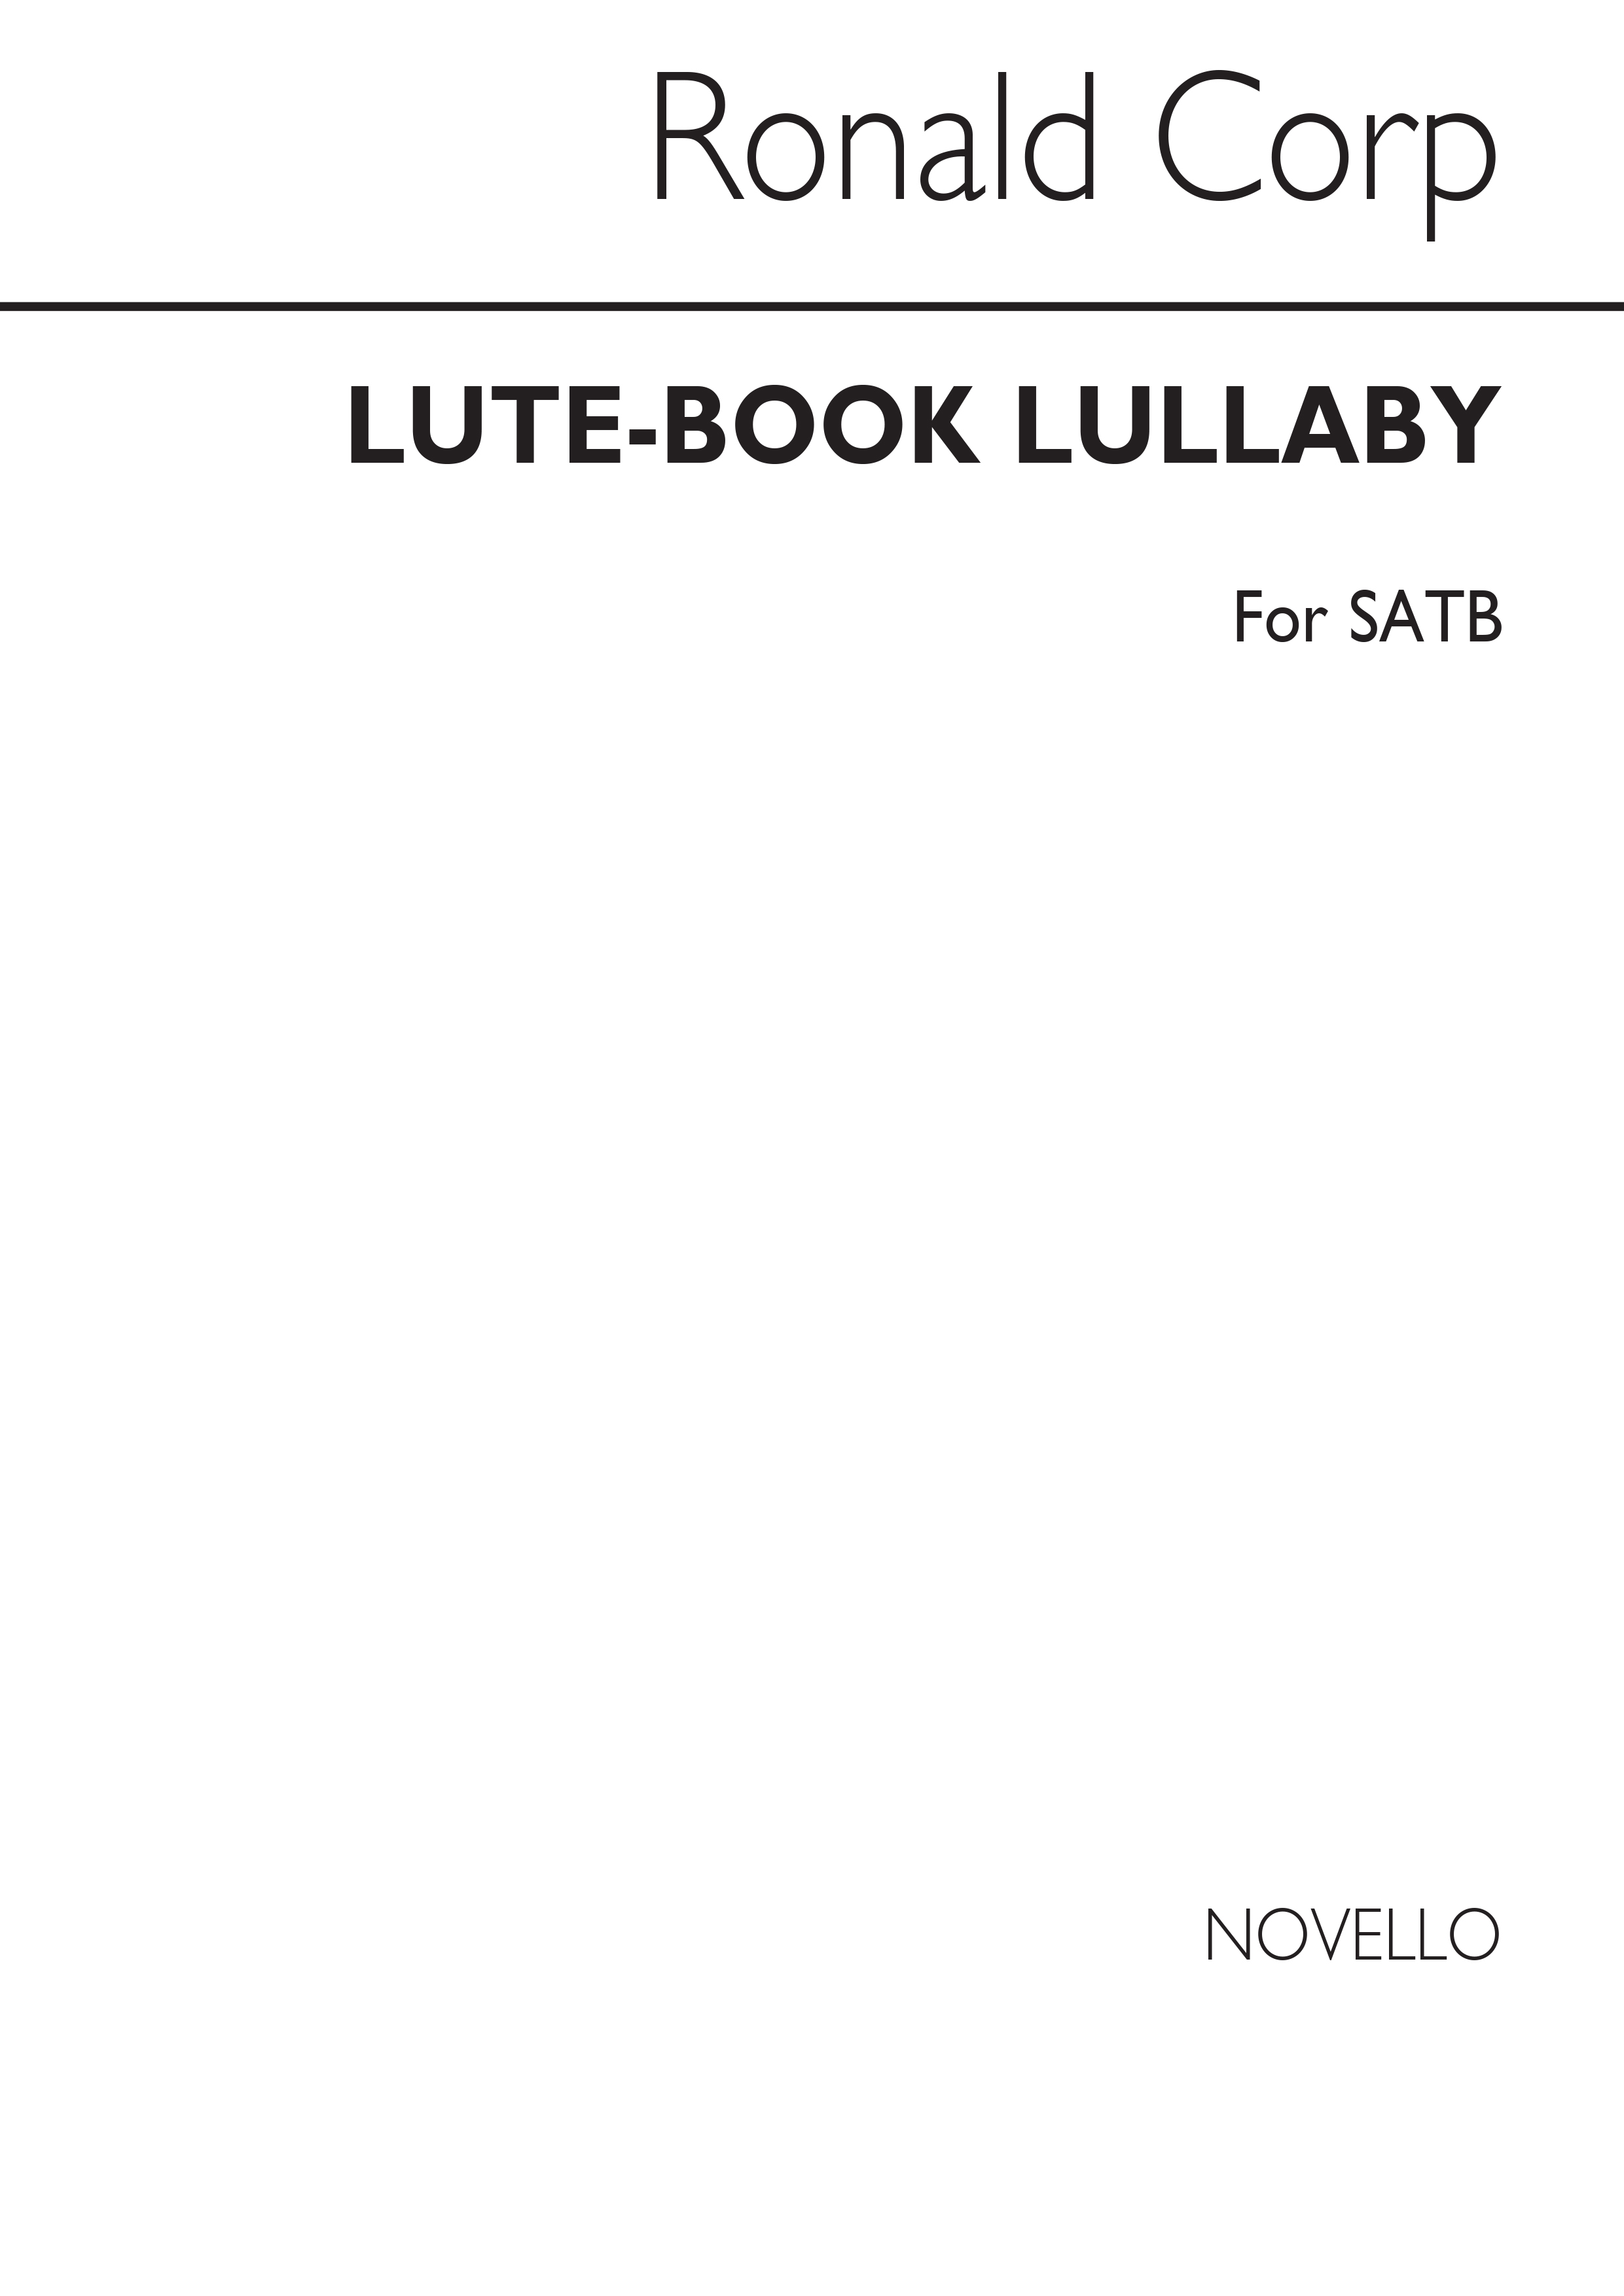 Corp: Lute-book Lullaby for SATB Chorus